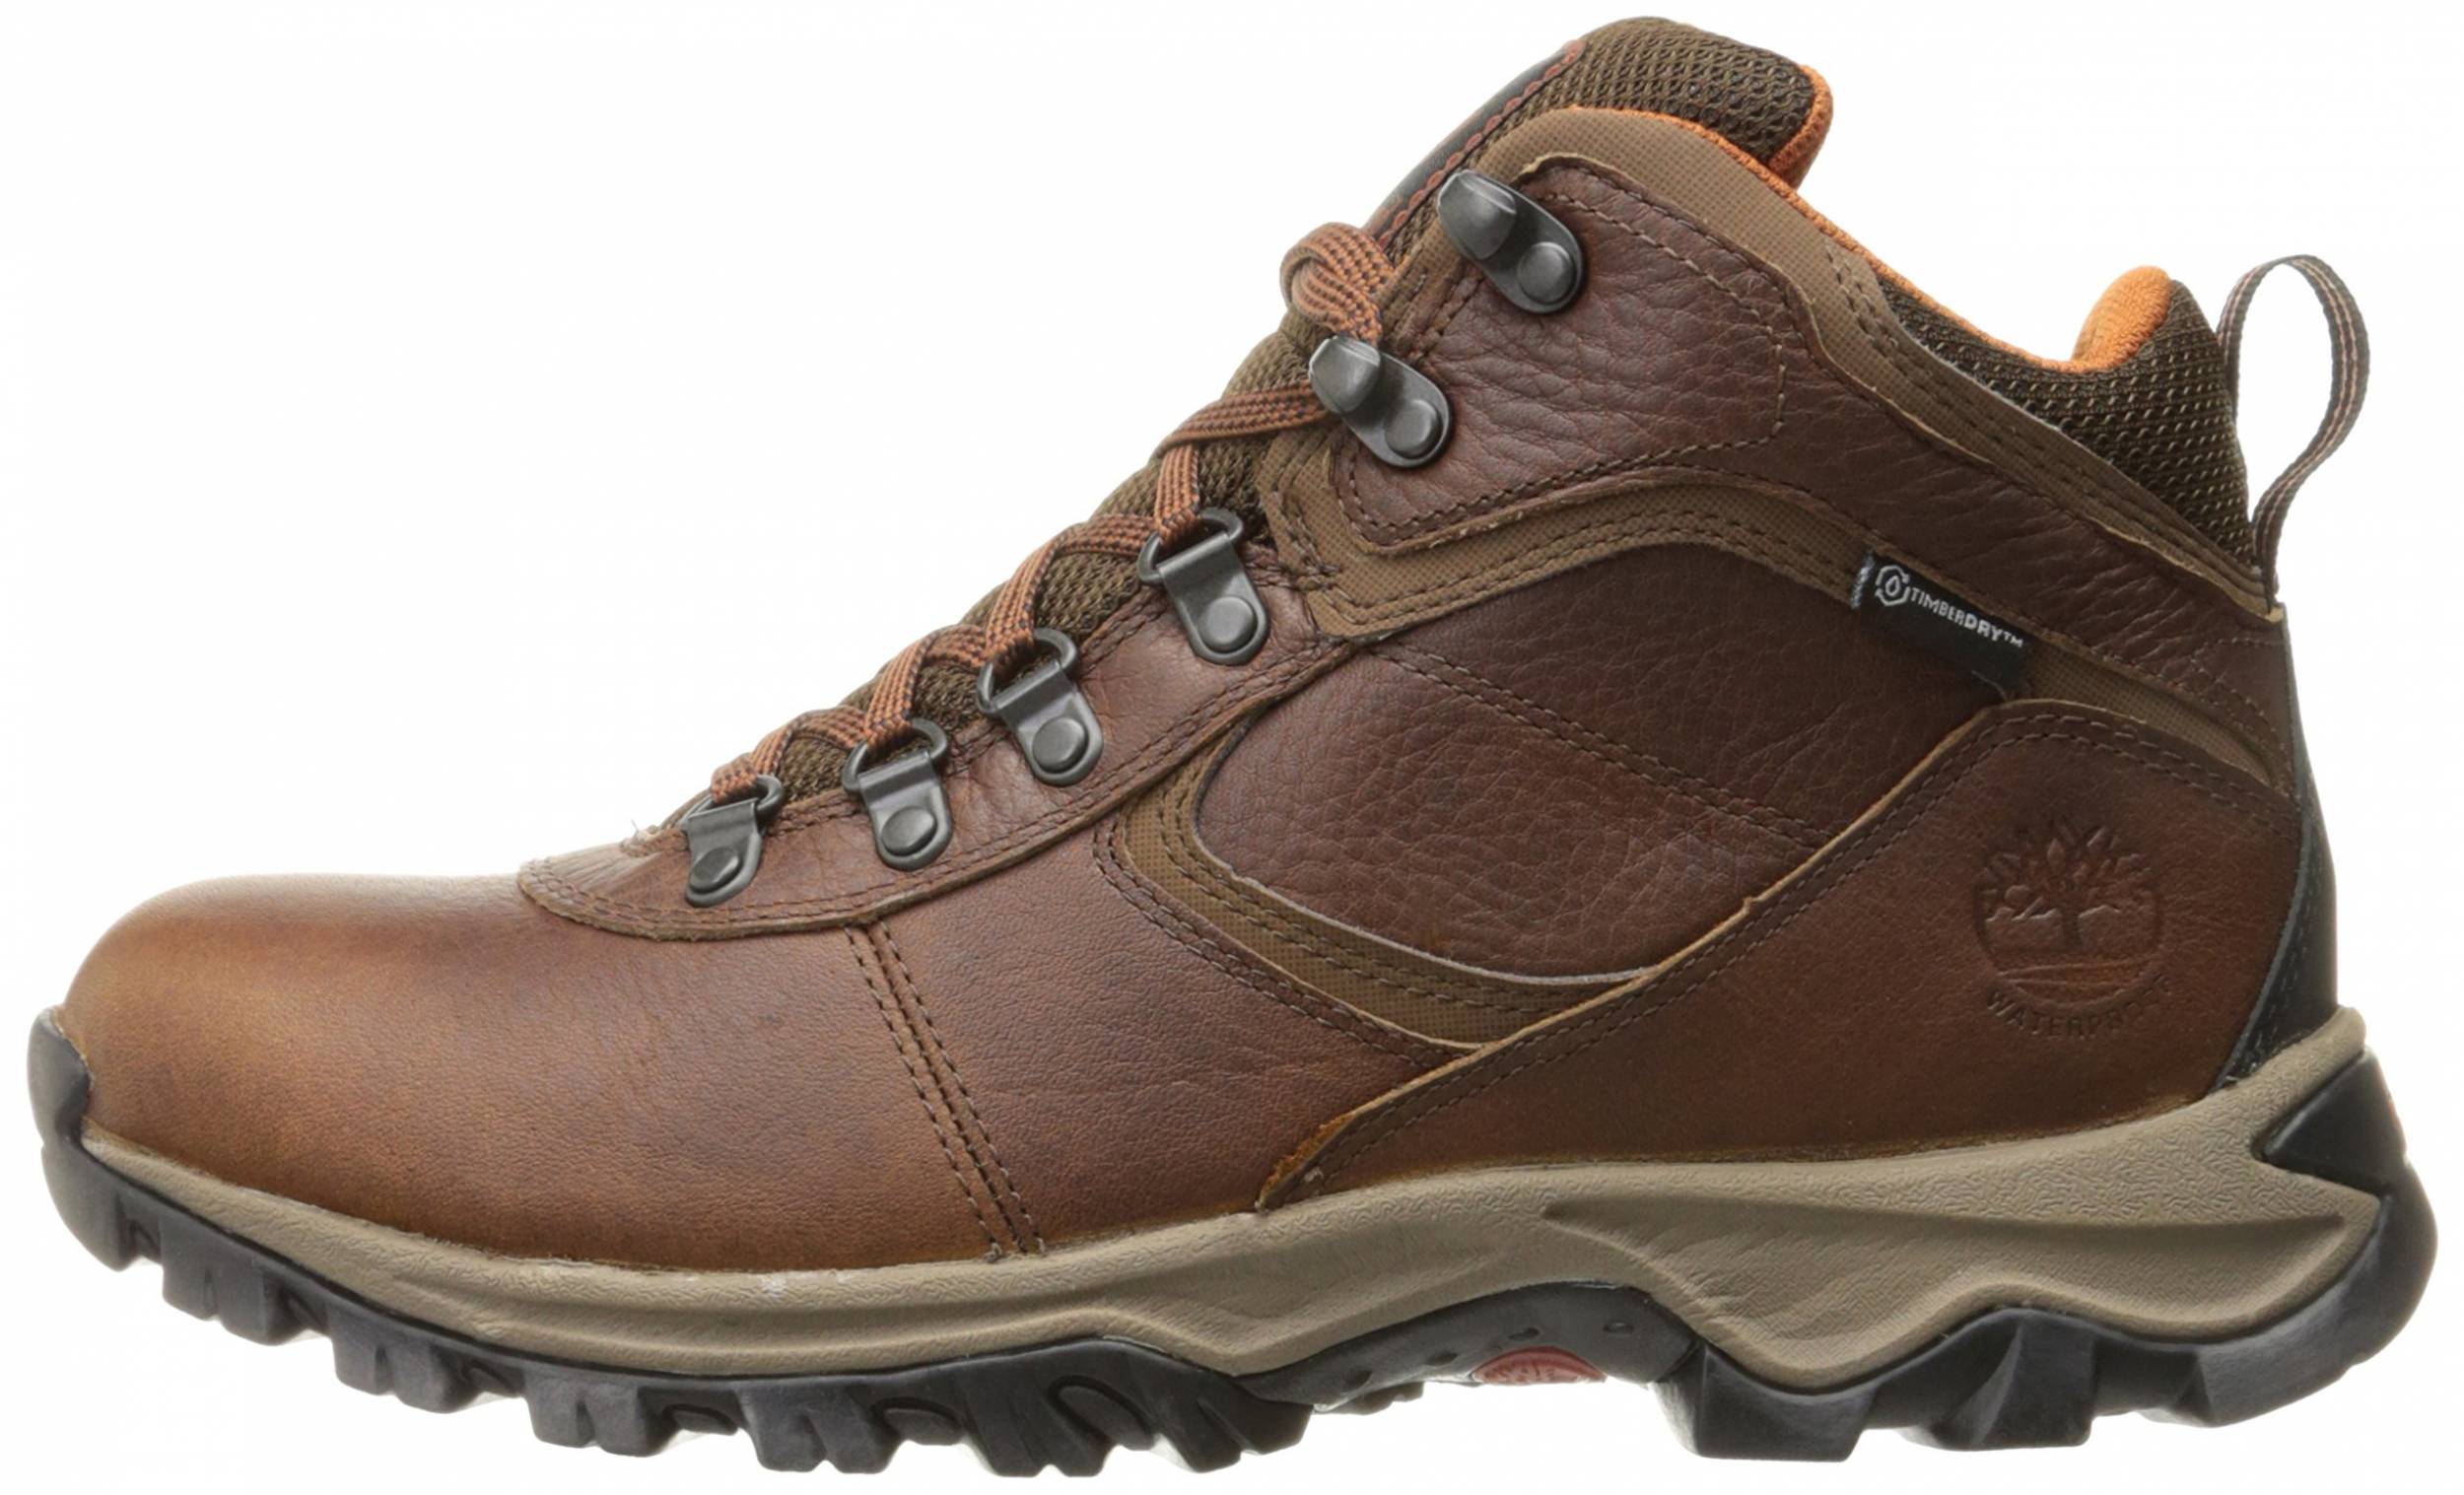 lightweight leather hiking boots